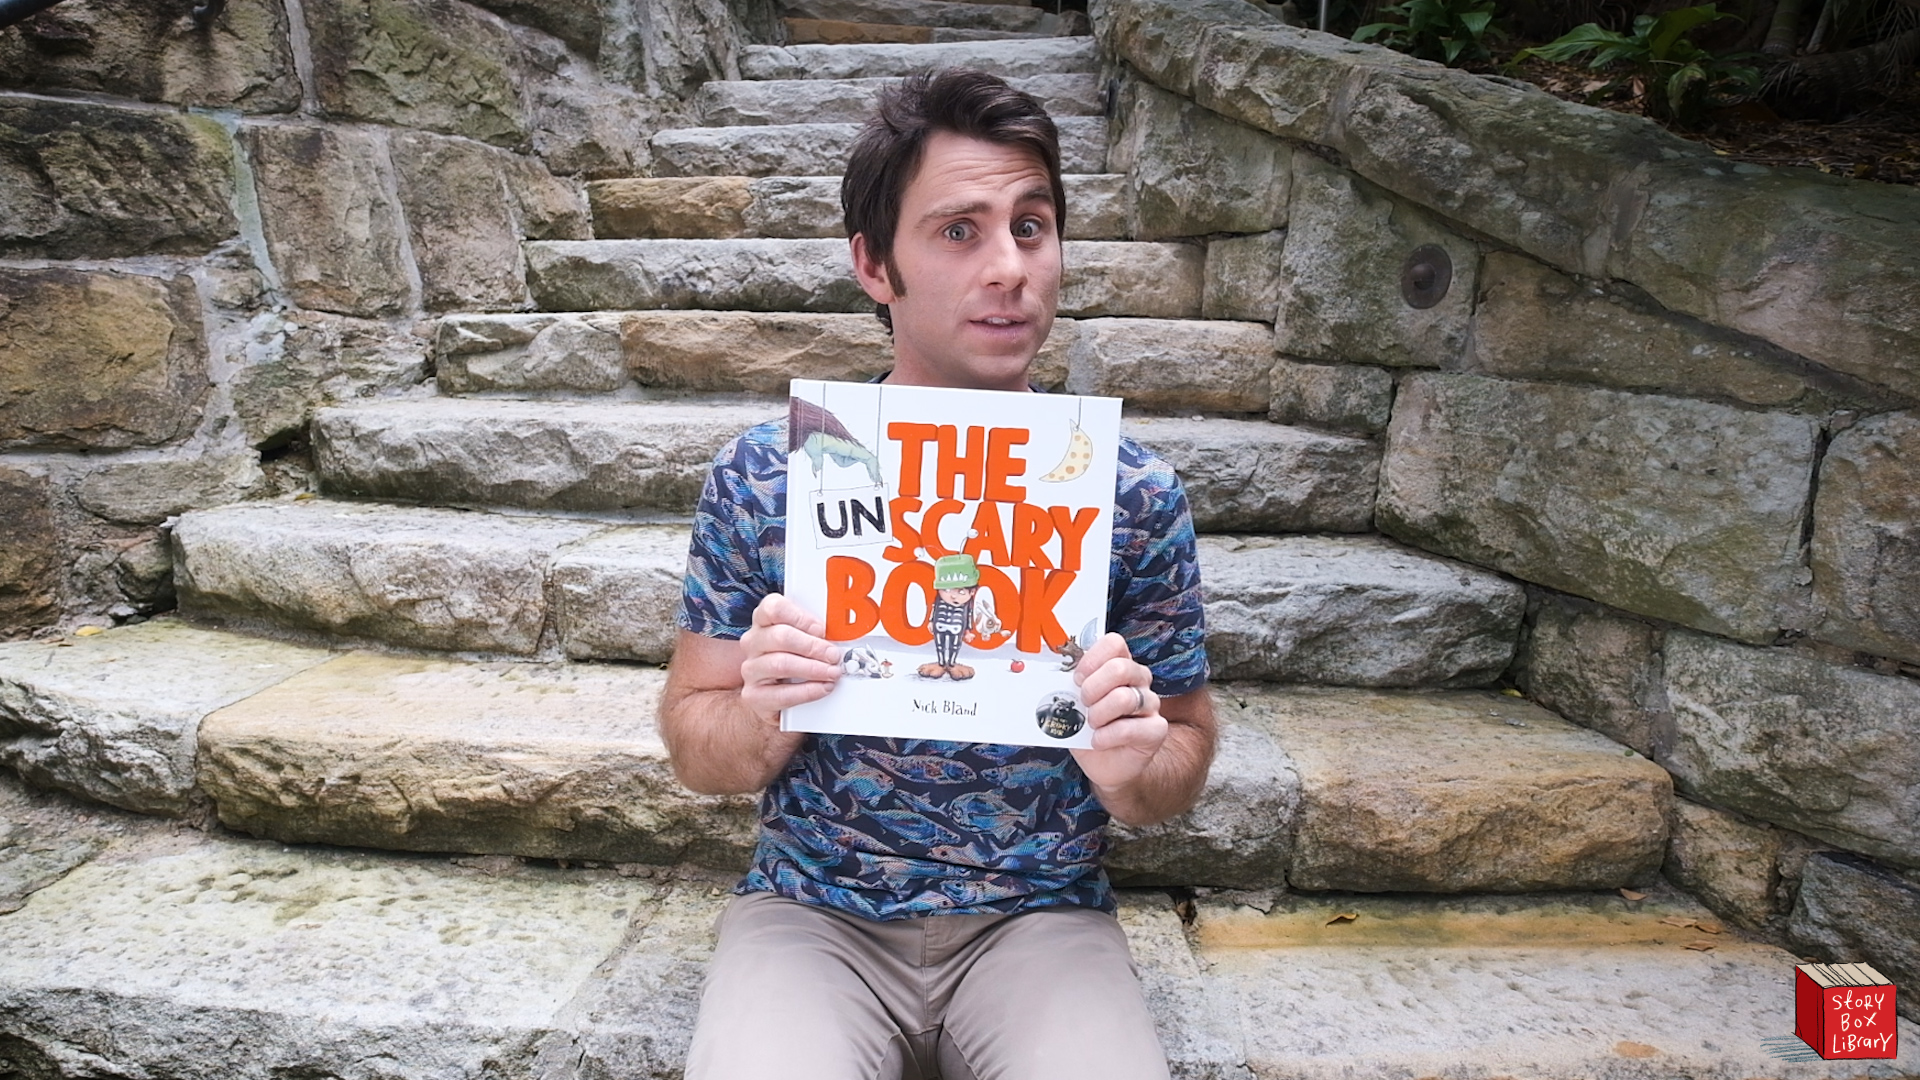 Jimmy Rees reading The Unscary Book by Nick Bland